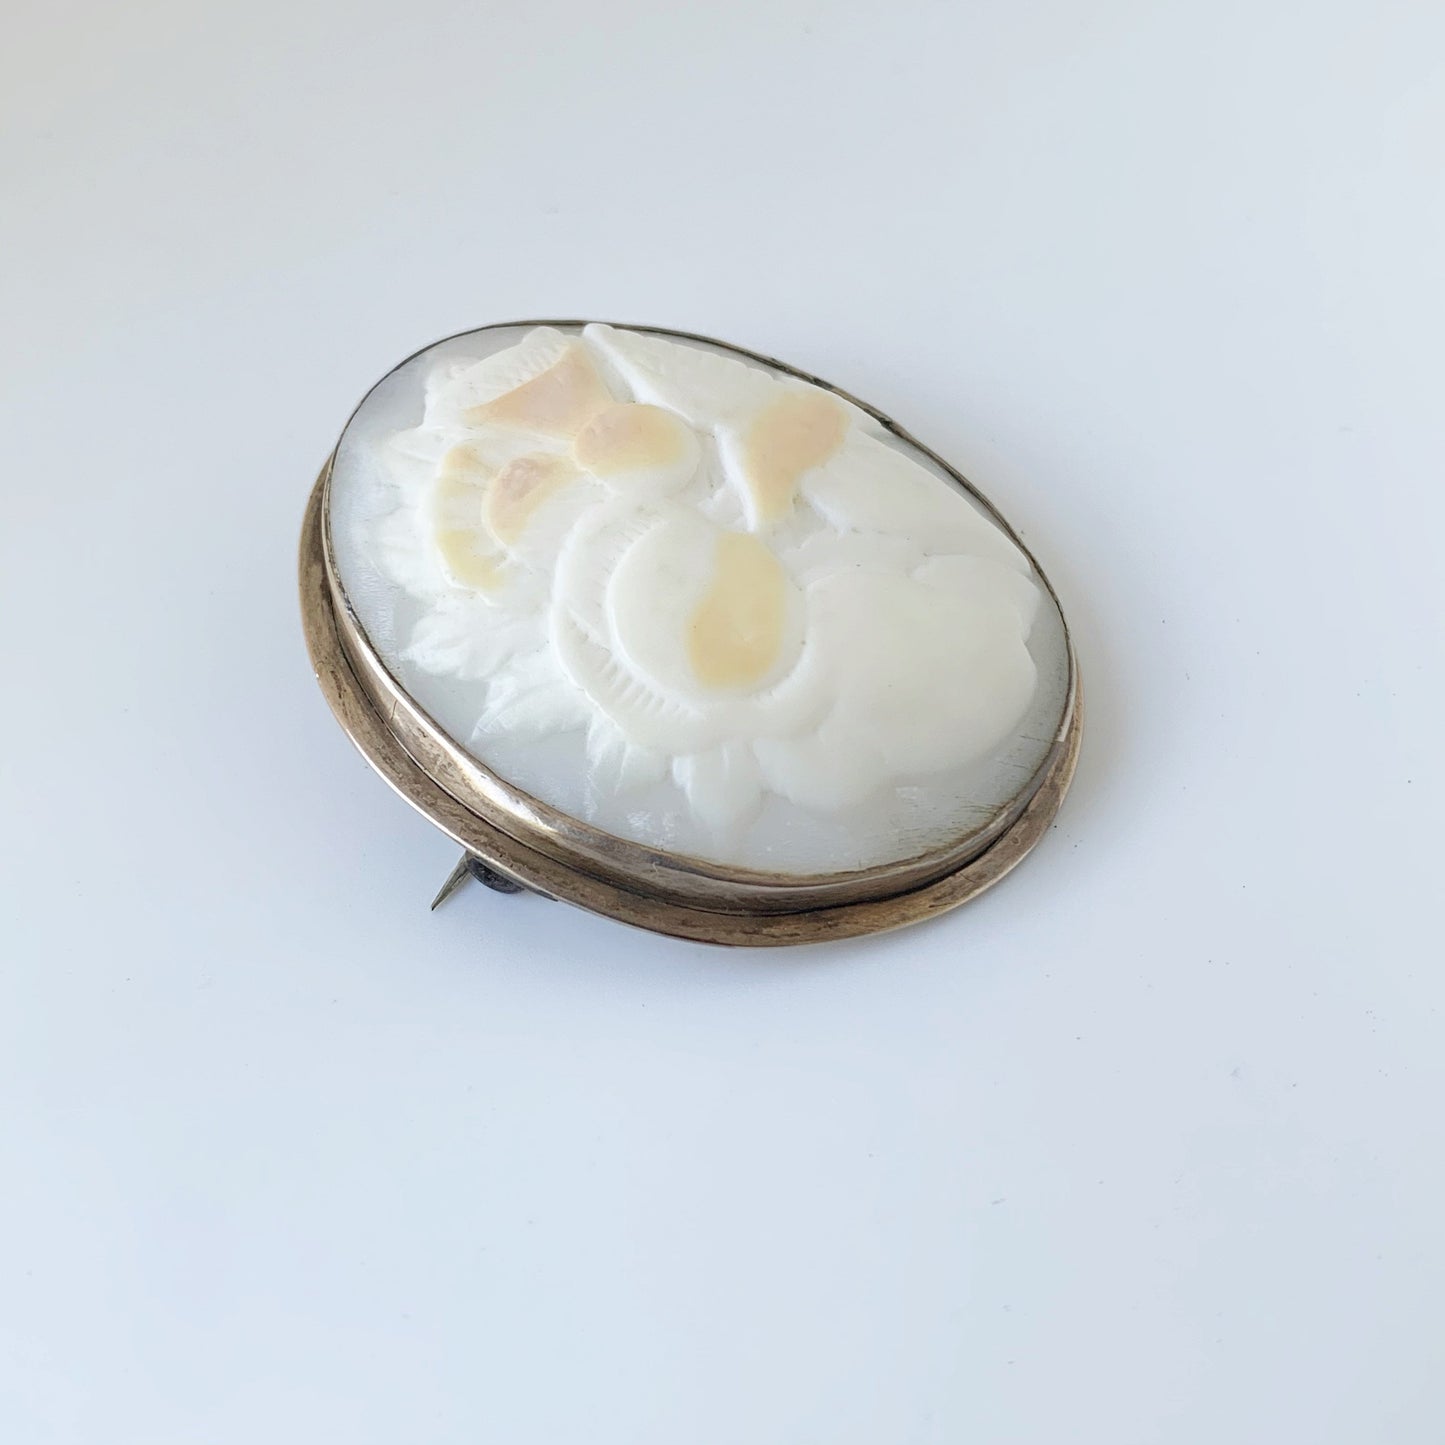 Antique Gold Cameo Brooch | Dove and Thistle | Shell Cameo Brooch